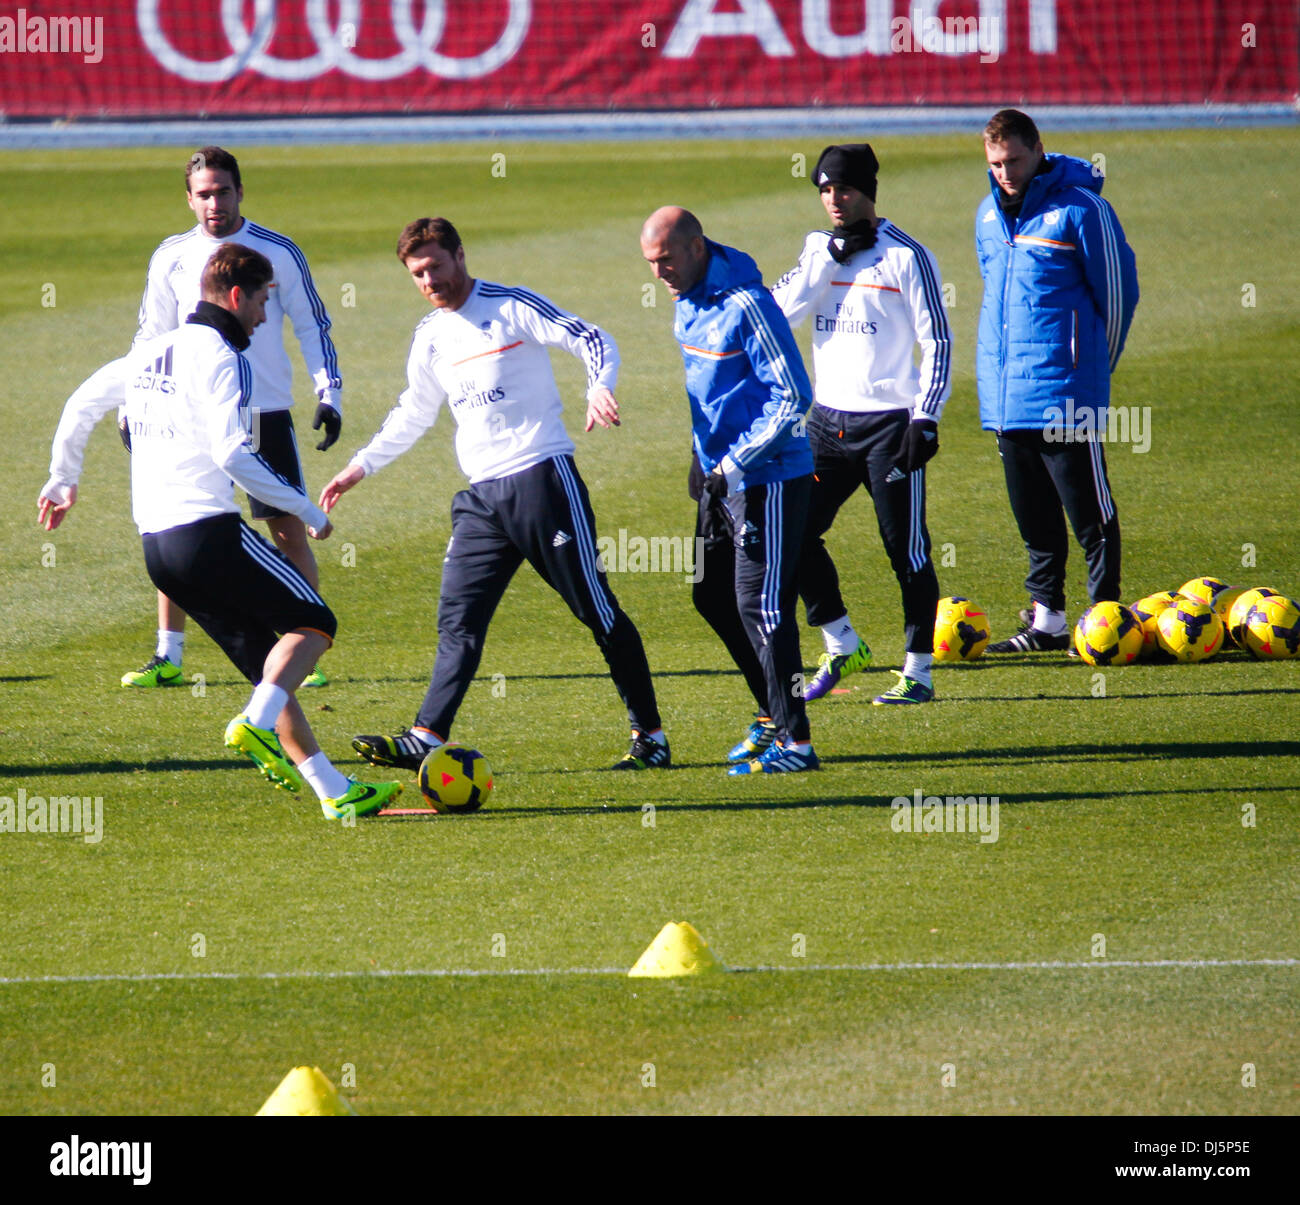 Madrid, Madrid, Spain. 22nd Nov, 2013. (Left to right) Sergio Ramos, Carvajal, Xabi Alonso, idane and Morata at a Real Madrid training session at the Valdebebas sports complex ahead of Liga Matchday 14 between Almeria and Real Madrid, on November 22, 2013 in Madrid, Spain Credit:  Madridismo Sl/Madridismo/ZUMAPRESS.com/Alamy Live News Stock Photo